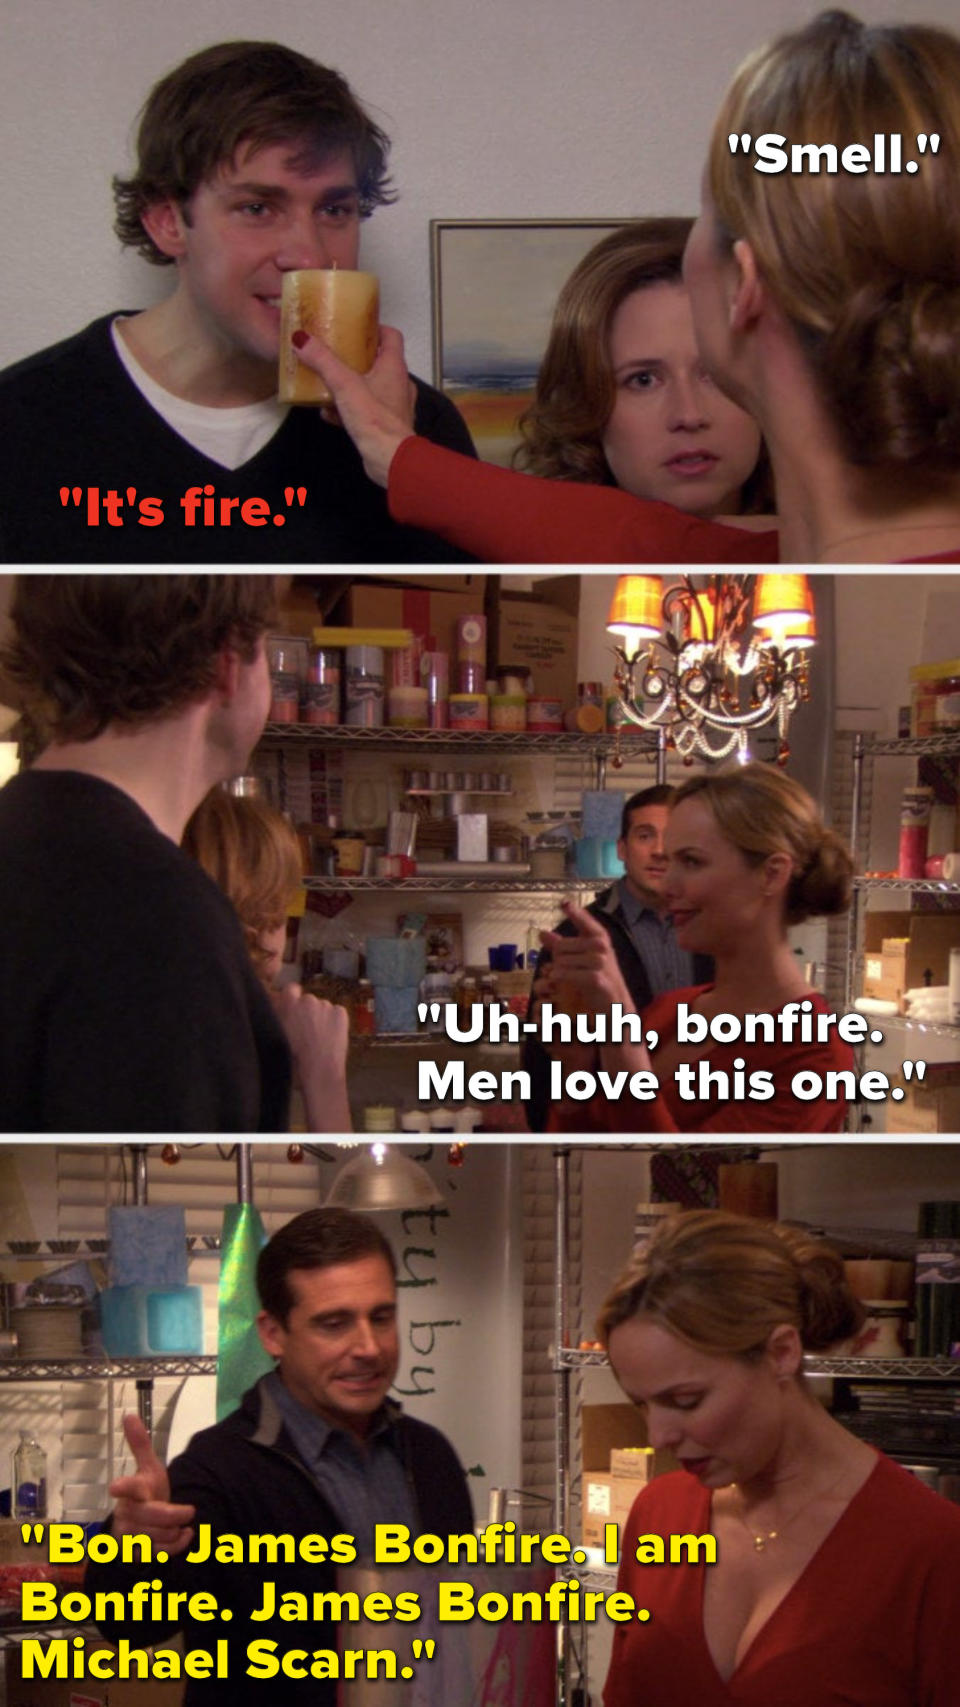 Jan lifts a candle and says, "Smell," Jim says, "It's fire," Jan says, "Uh-huh, bonfire, men love this one," and Michael says, "Bon, James Bonfire, I am Bonfire, James Bonfire, Michael Scarn"